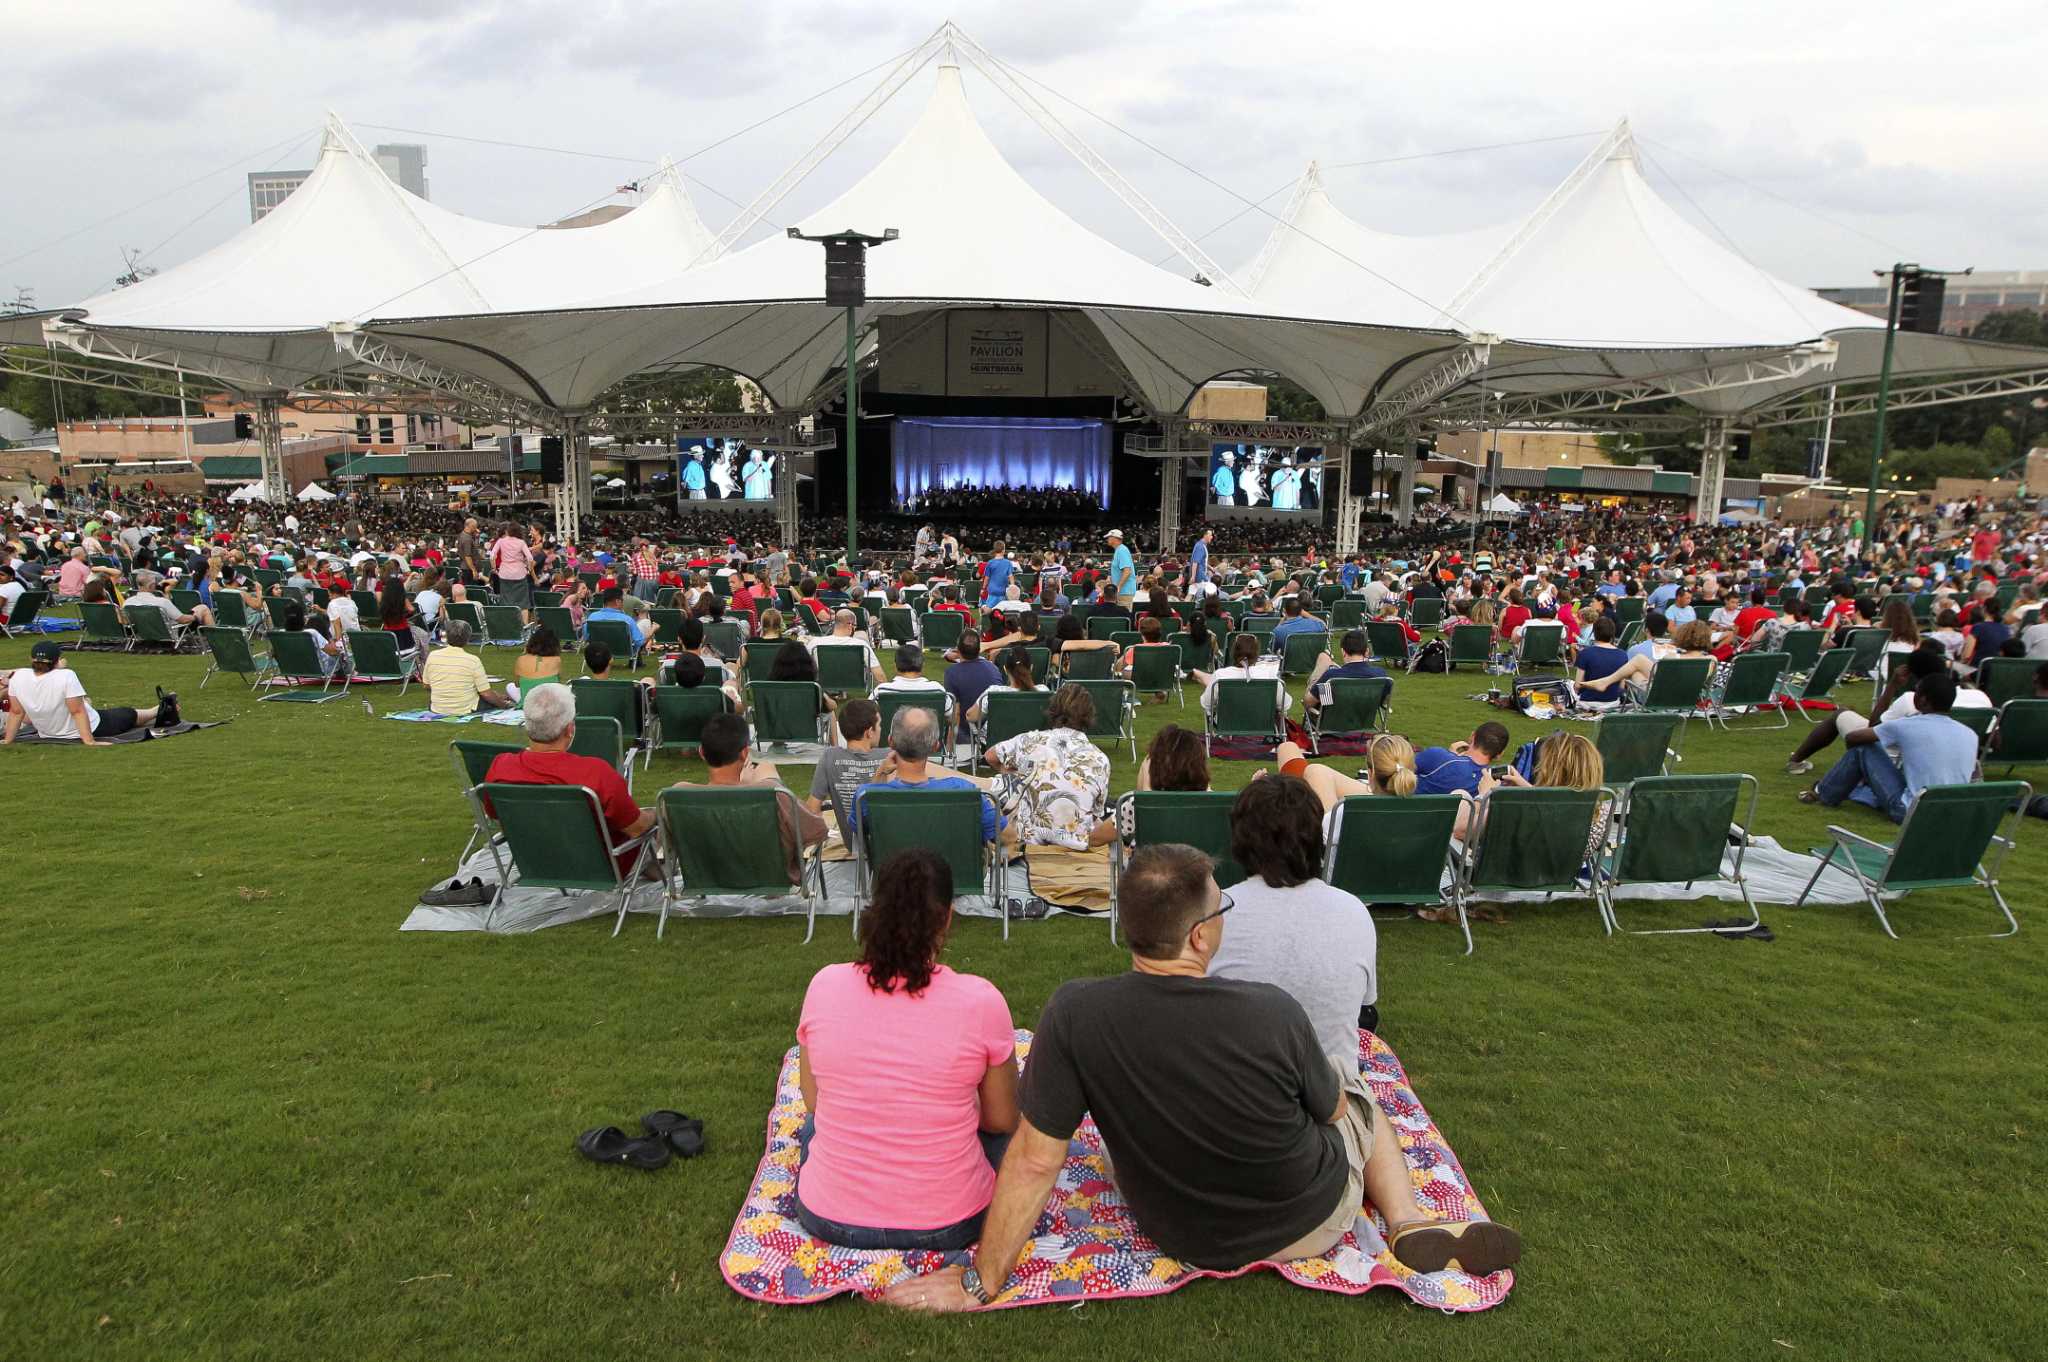 Woodlands' Mitchell Pavilion named No. 4 amphitheater in the world in